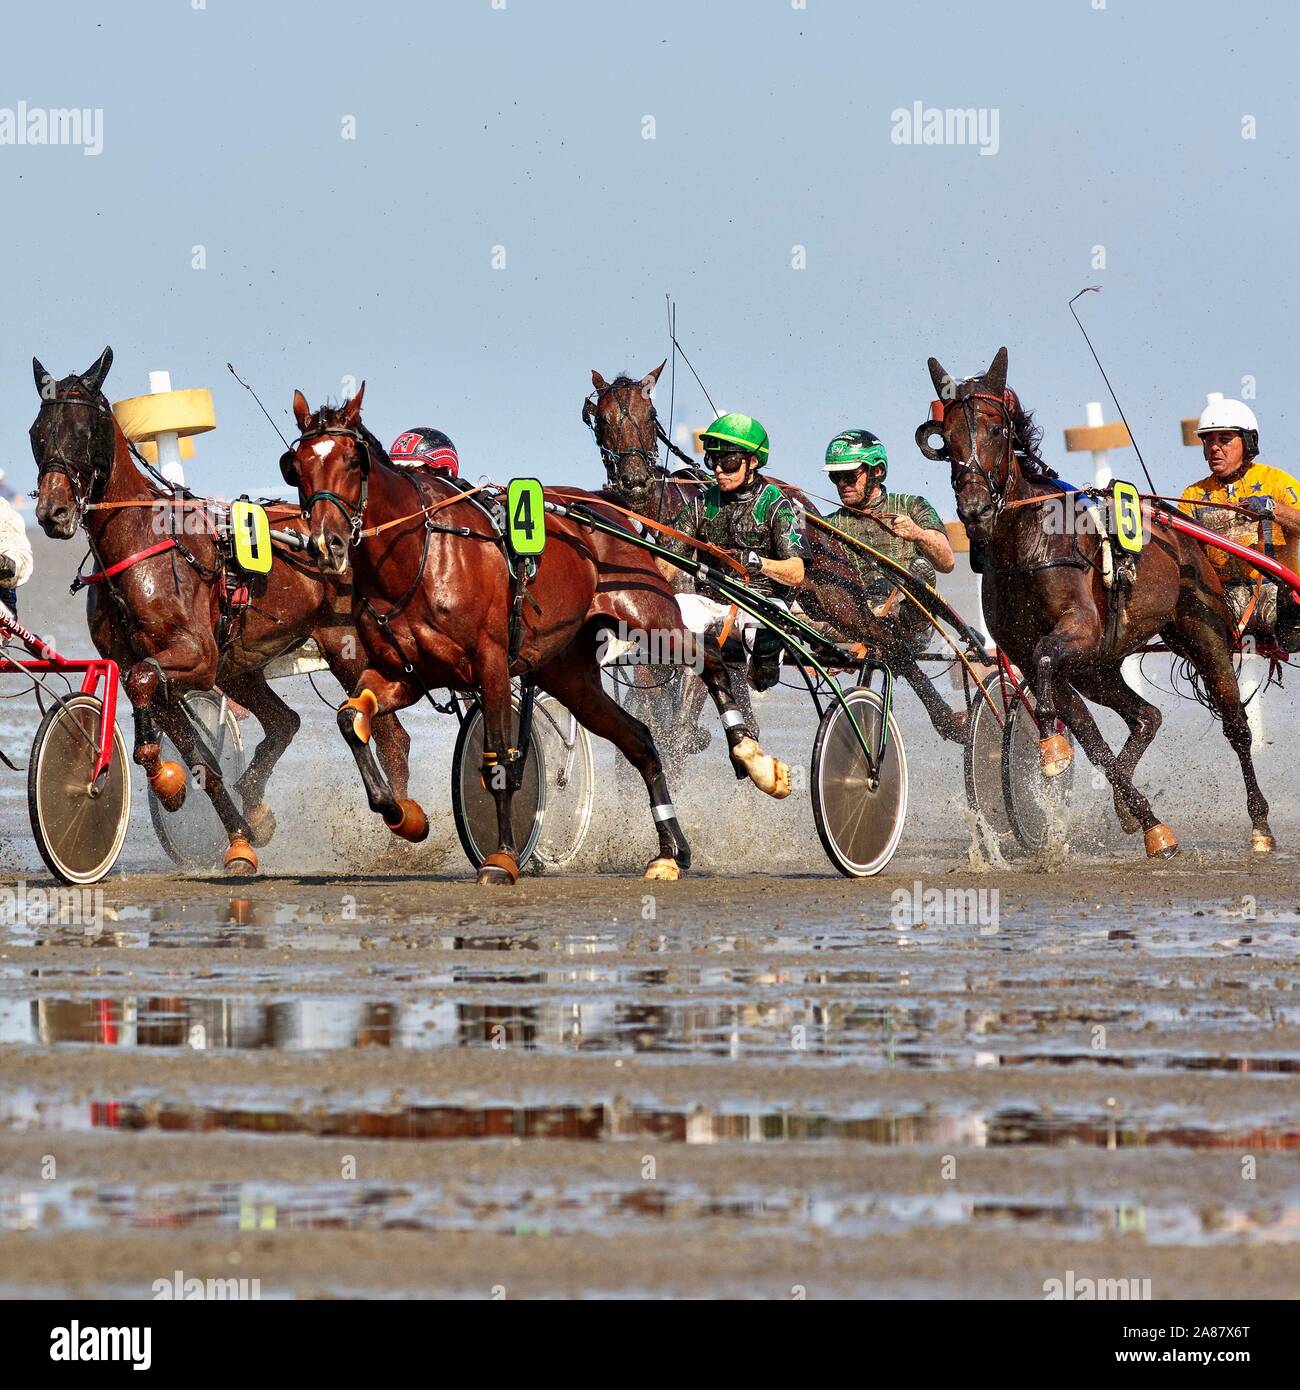 Horse racing, trotting in the Wadden Sea, Duhne mudflat race, Cuxhaven, Lower Saxony, Germany Stock Photo